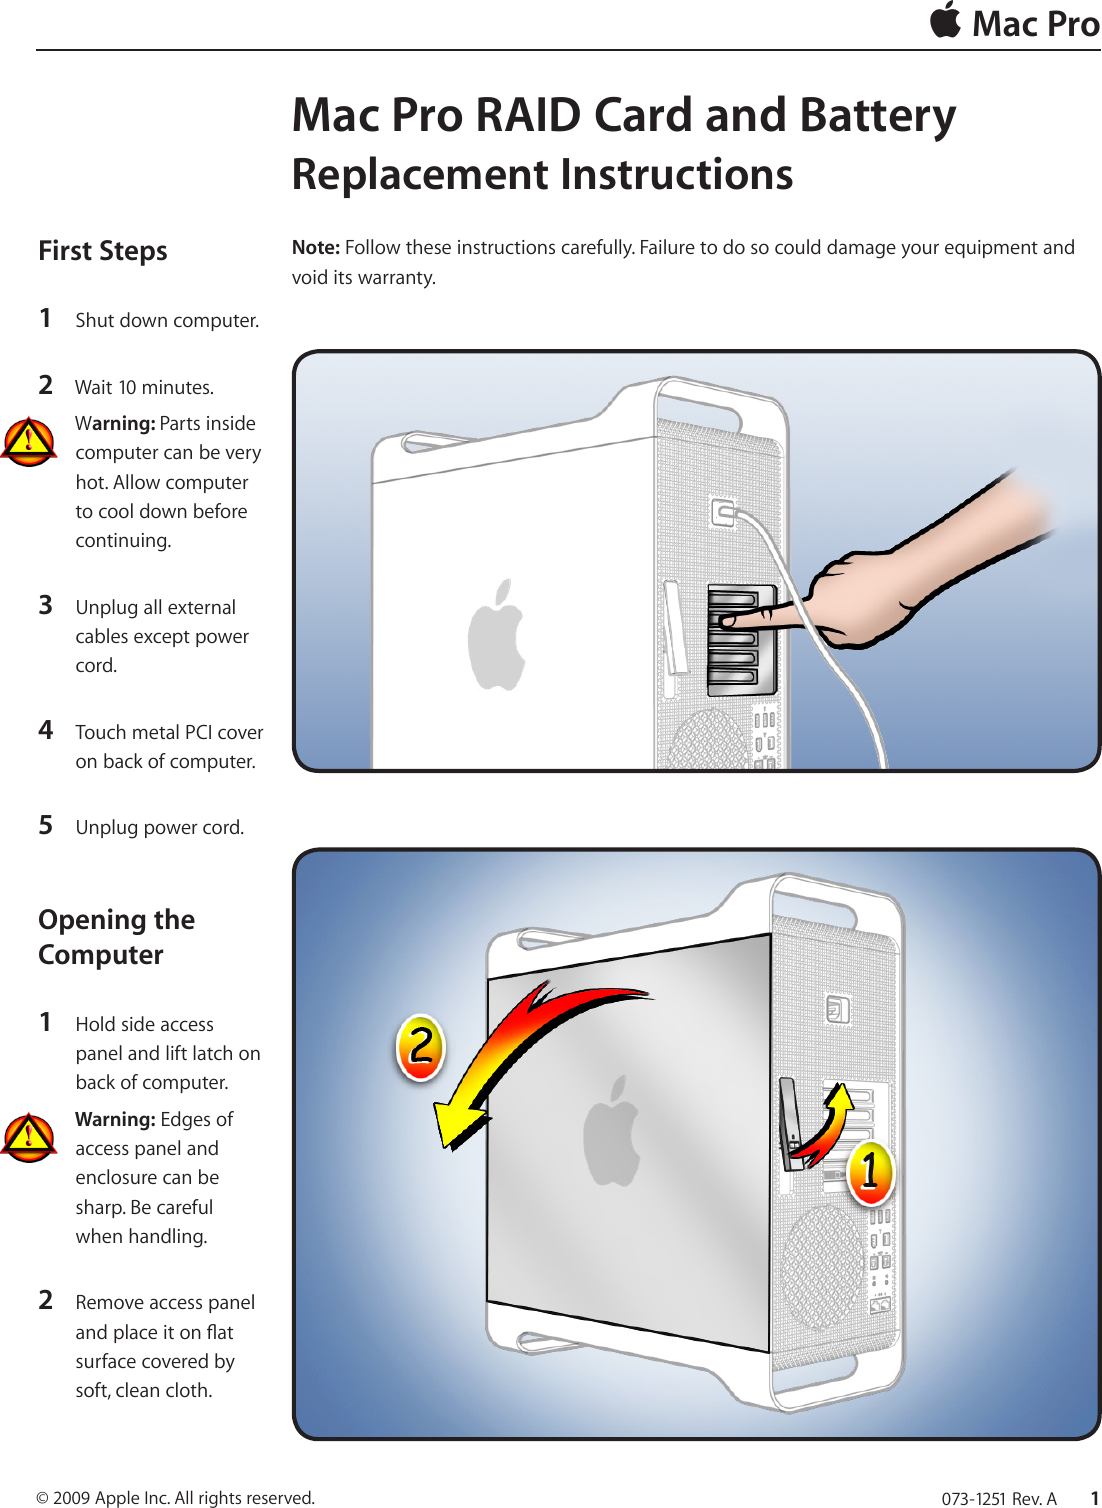 Page 1 of 6 - Apple MacPro(Early2009) User Manual Mac Pro(Early2009and Mid2010)-Mac Pro RAIDCardand Battery Replacement Instructions Early2009 RAID Card And DIY